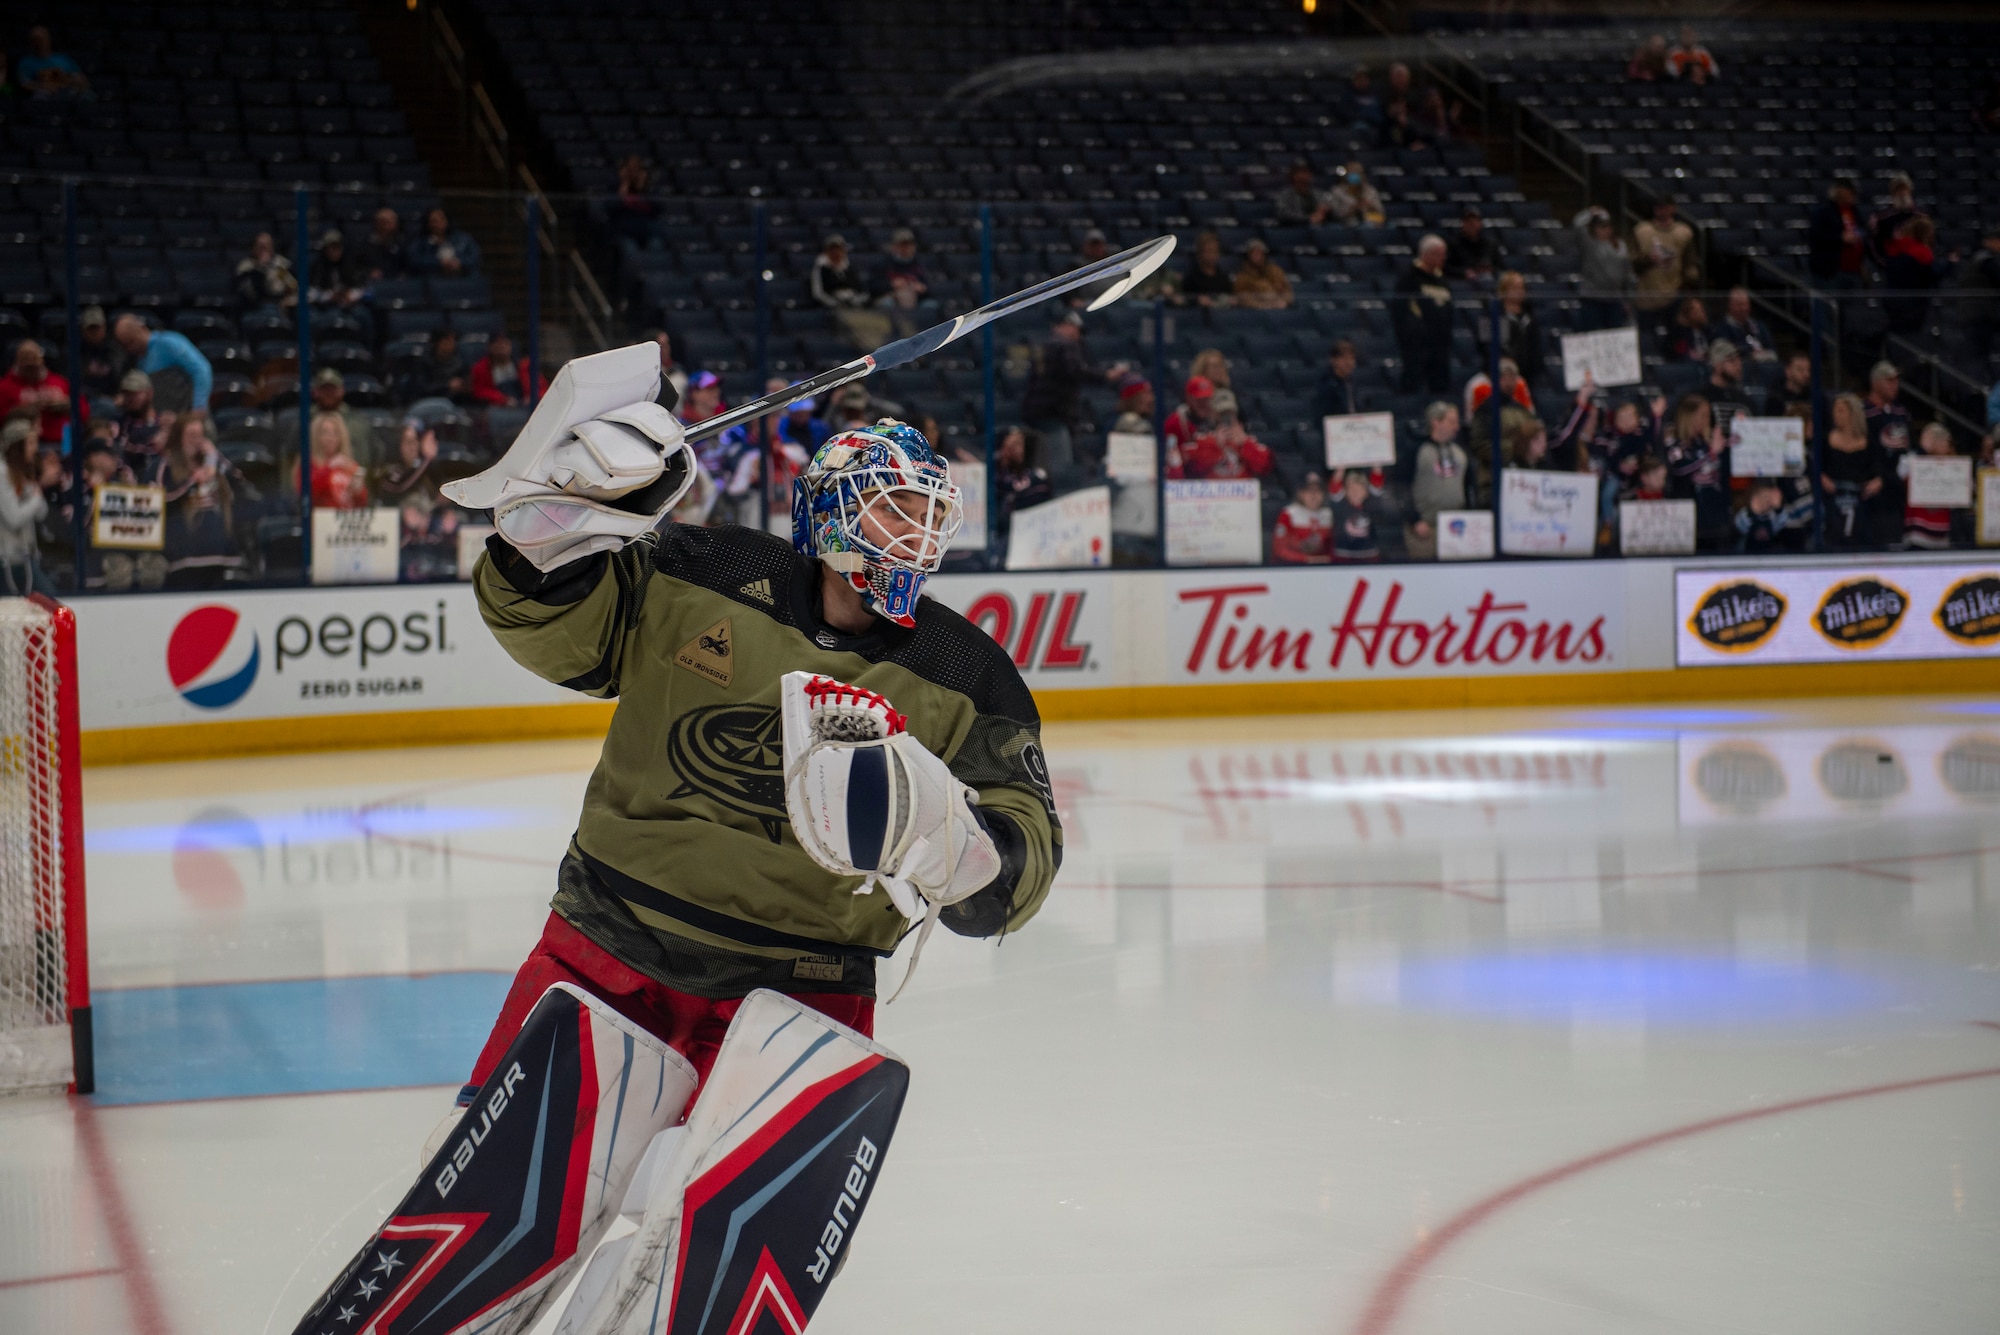 Columbus Blue Jackets goaltender Elvis Merzļikins warms up in a camouflage-style uniform as part of Military Appreciation Night on April 7, 2022, at Nationwide Arena, Columbus, Ohio. Prior to facing the Philadelphia Flyers, the team hosted a friendly alumni exhibition with the Wright Flyers, as well as several other recognition activities throughout the night. (U.S. Air Force photo by Senior Airman Jack Gardner)